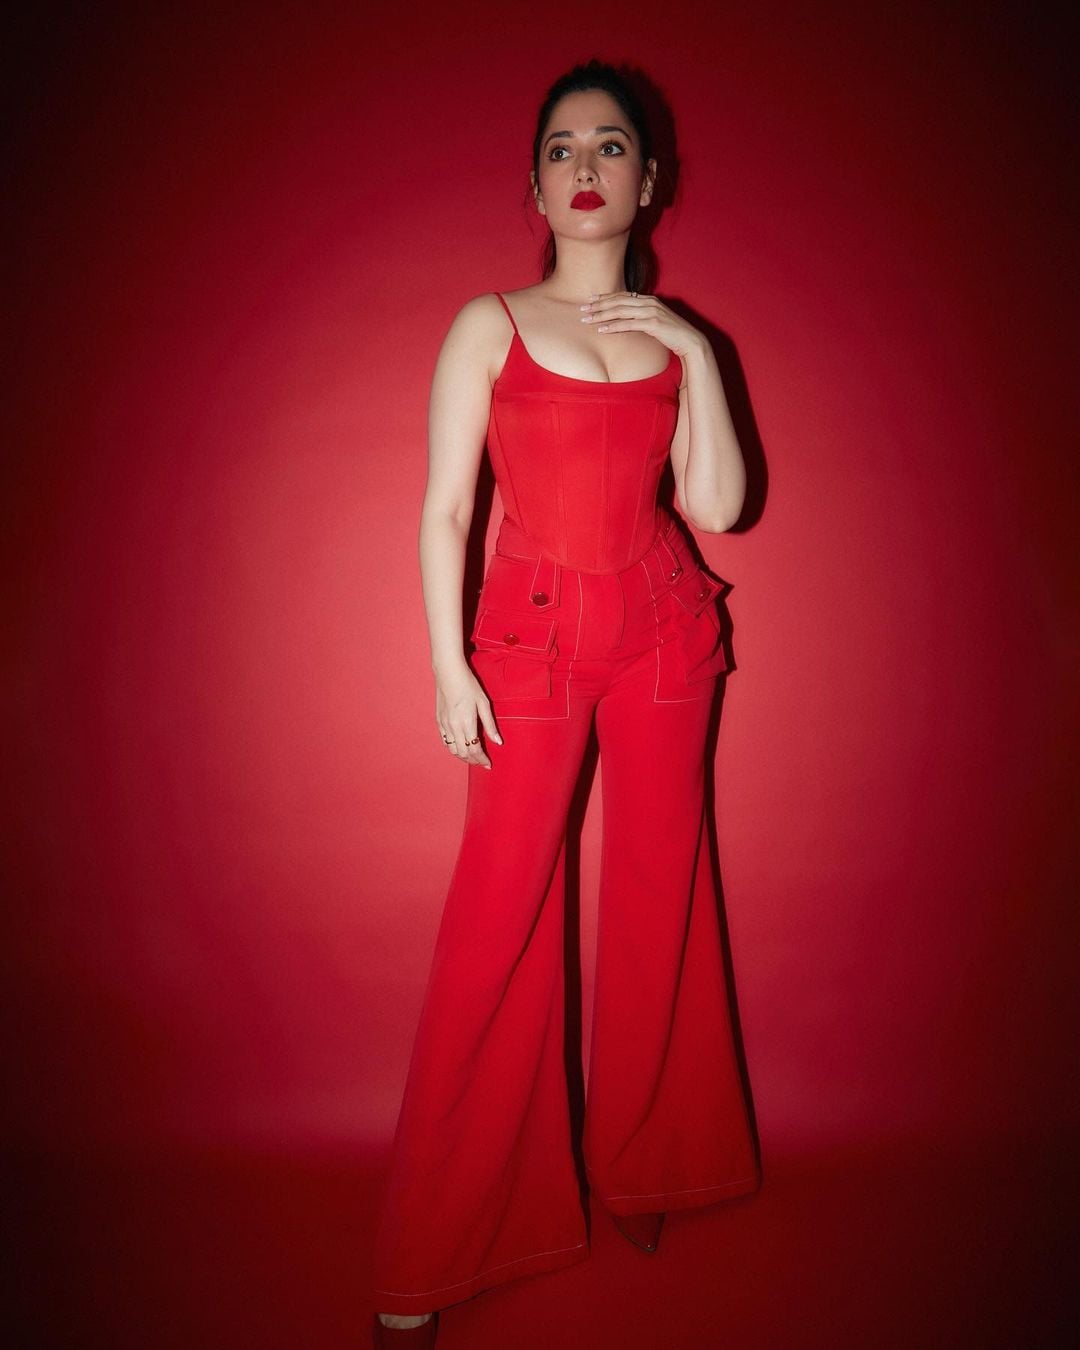 Tamannaah Bhatia looks uber chic in the all-red outfit